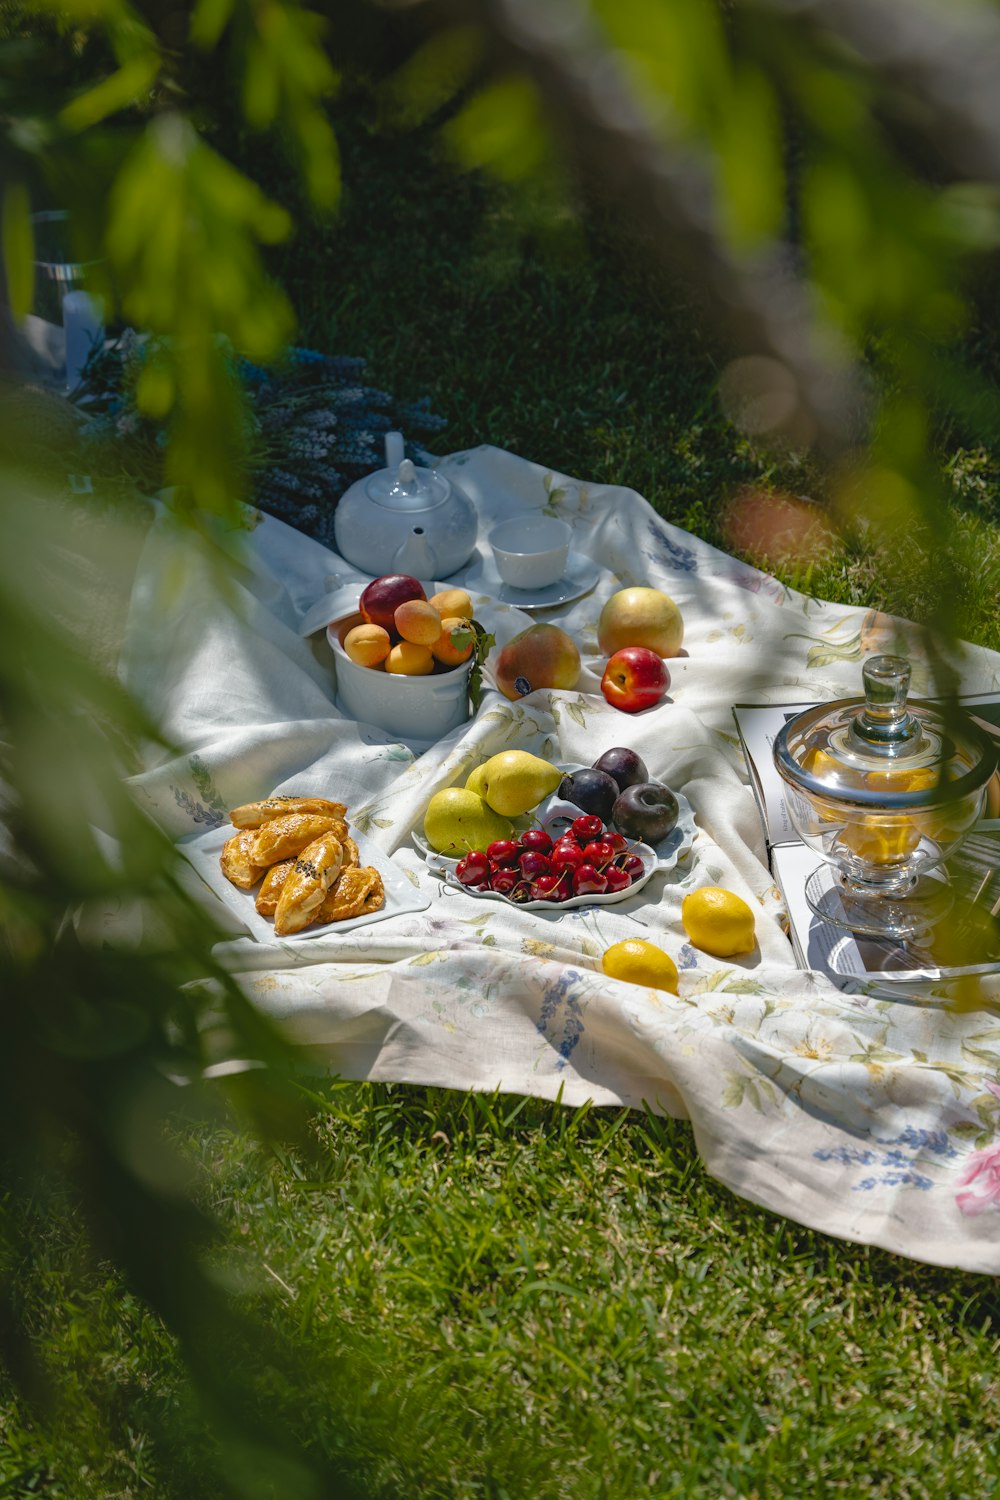 a picnic is set out on a blanket in the grass